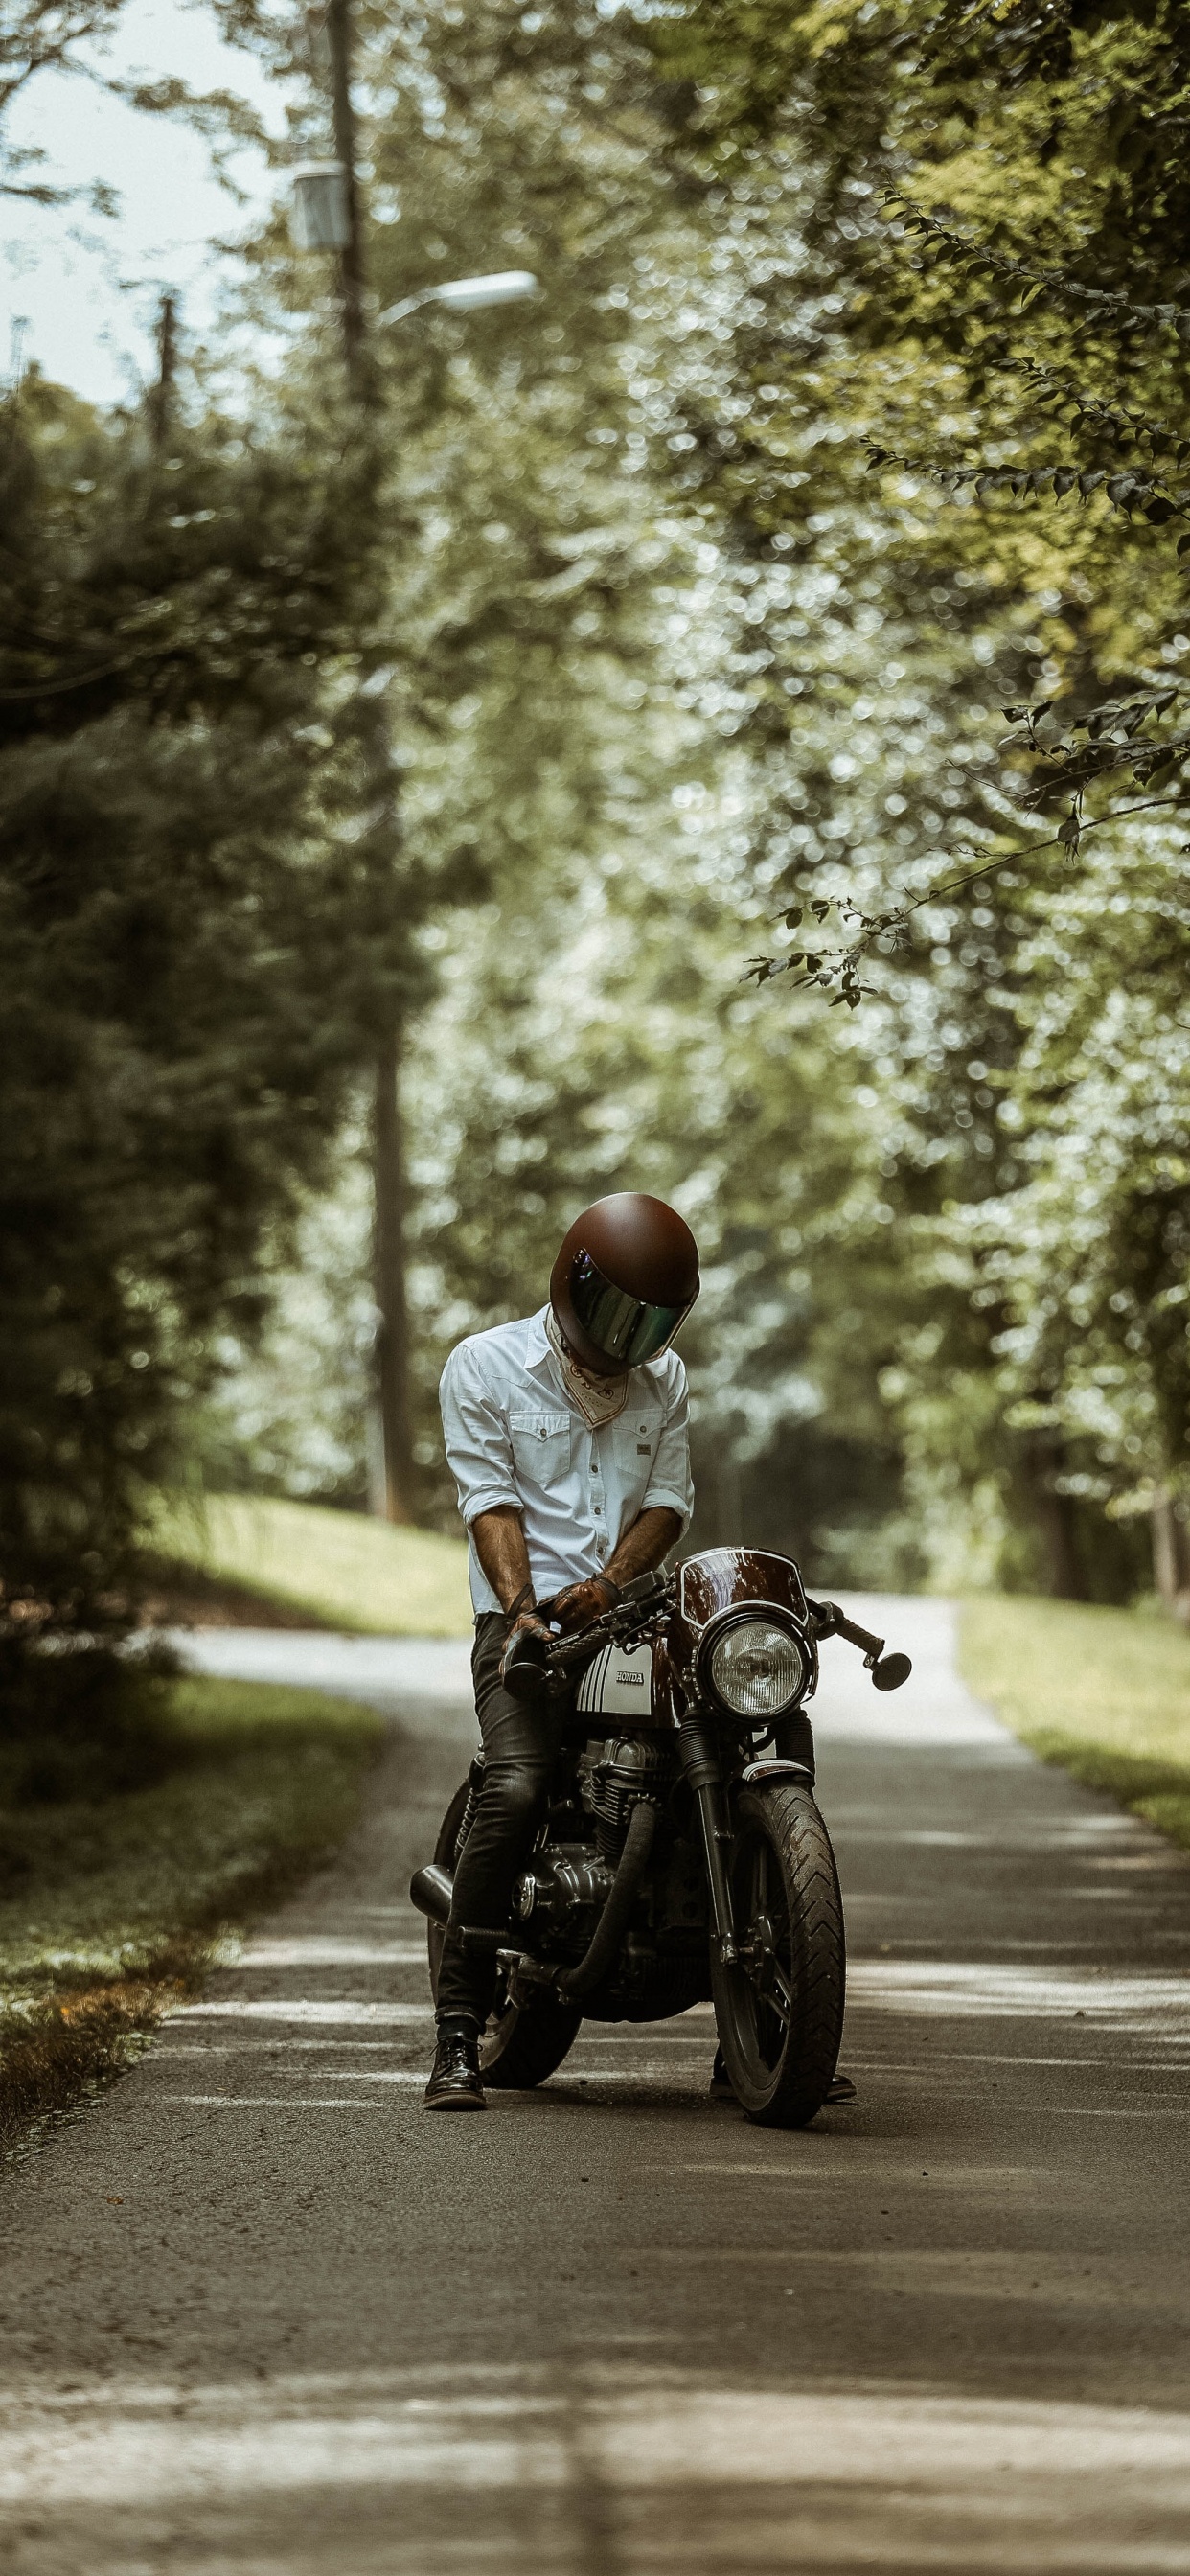 Man in White Shirt Riding Motorcycle on Road During Daytime. Wallpaper in 1242x2688 Resolution